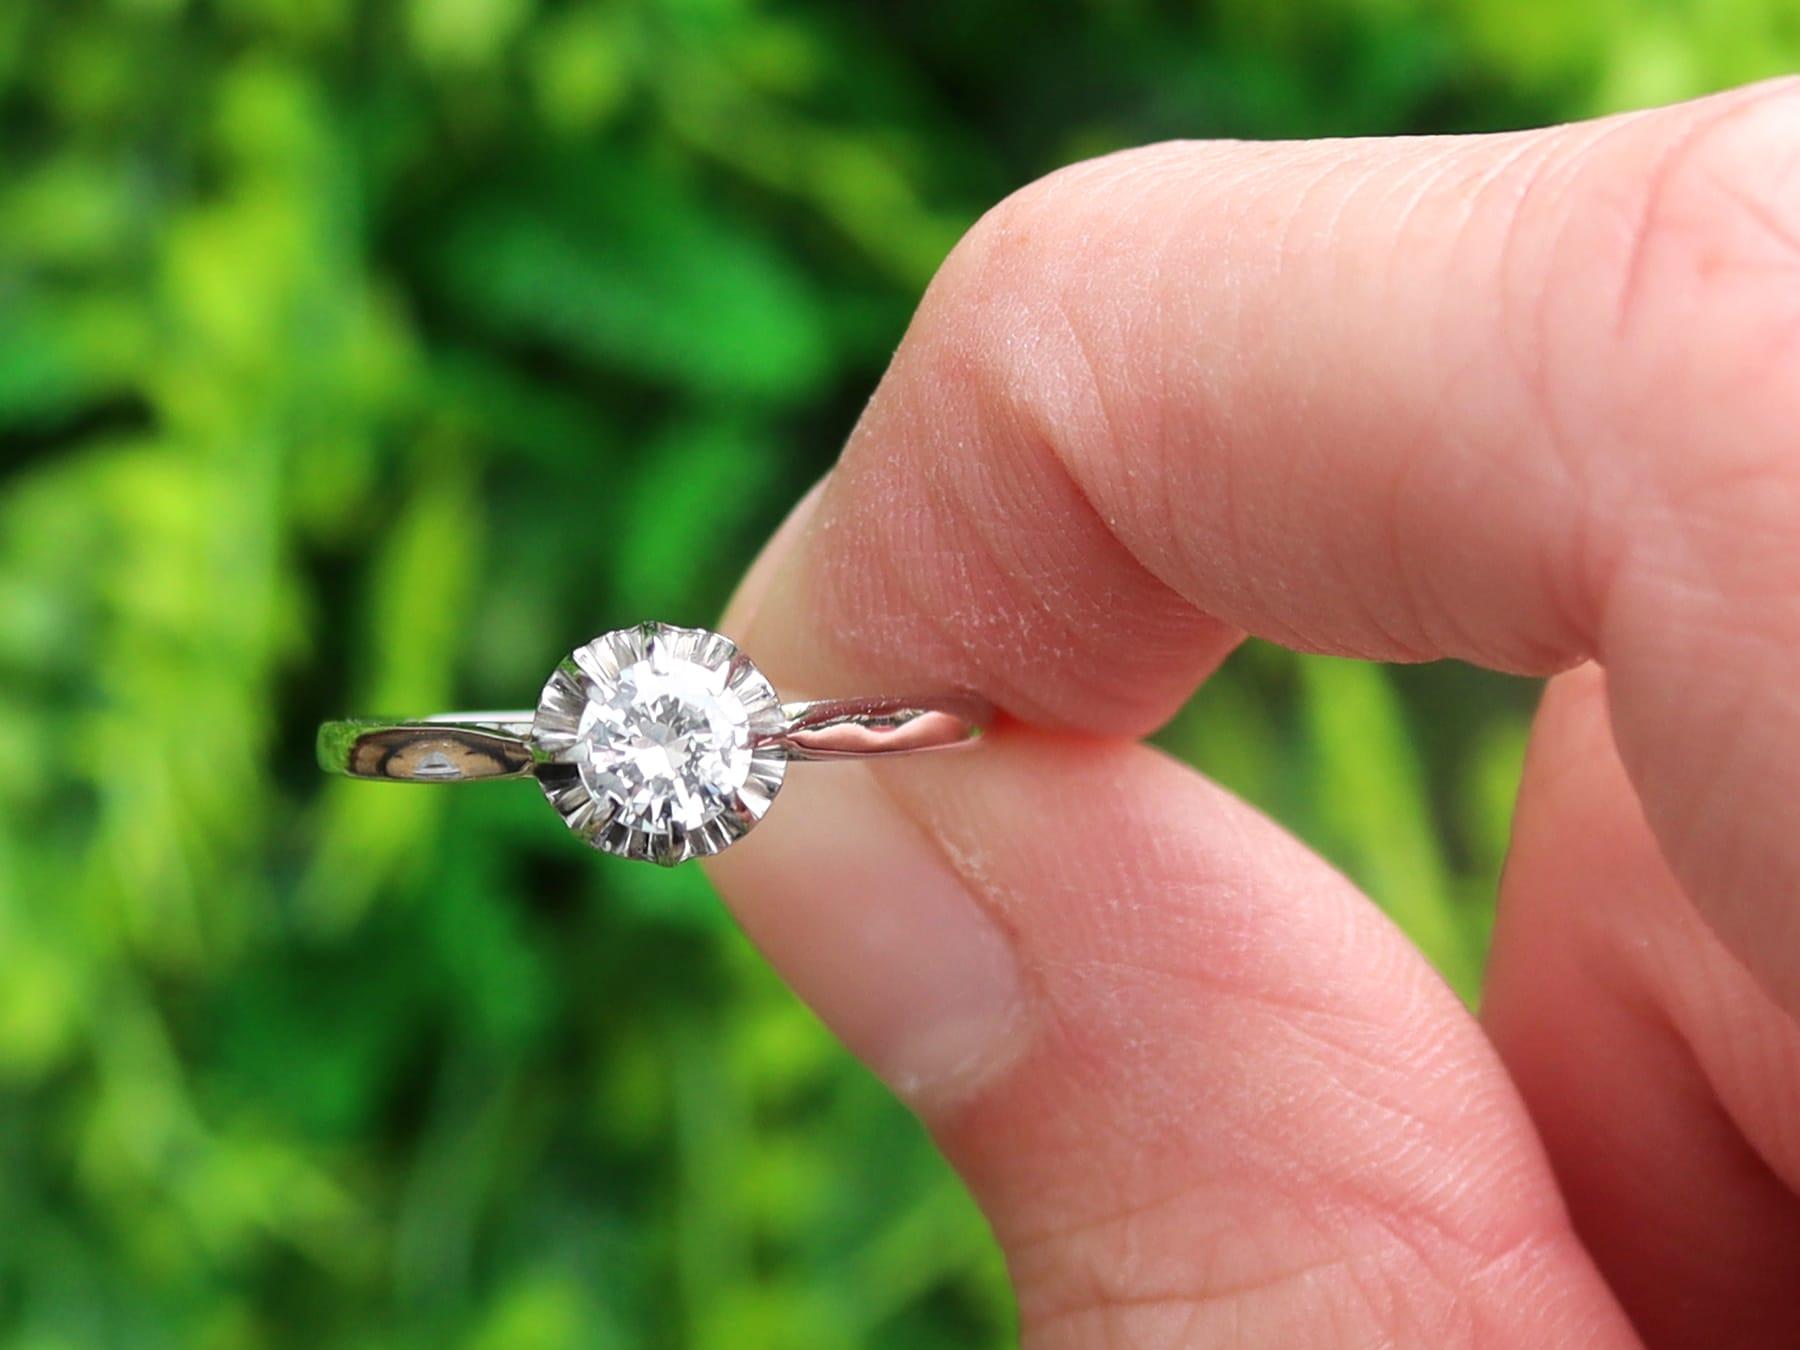 A fine vintage 0.37 carat diamond and 18 karat white gold solitaire ring; part of the diverse vintage engagement ring collections.

This fine vintage diamond solitaire ring has been crafted in 18k white gold.

The pierced decorated, elevated basket